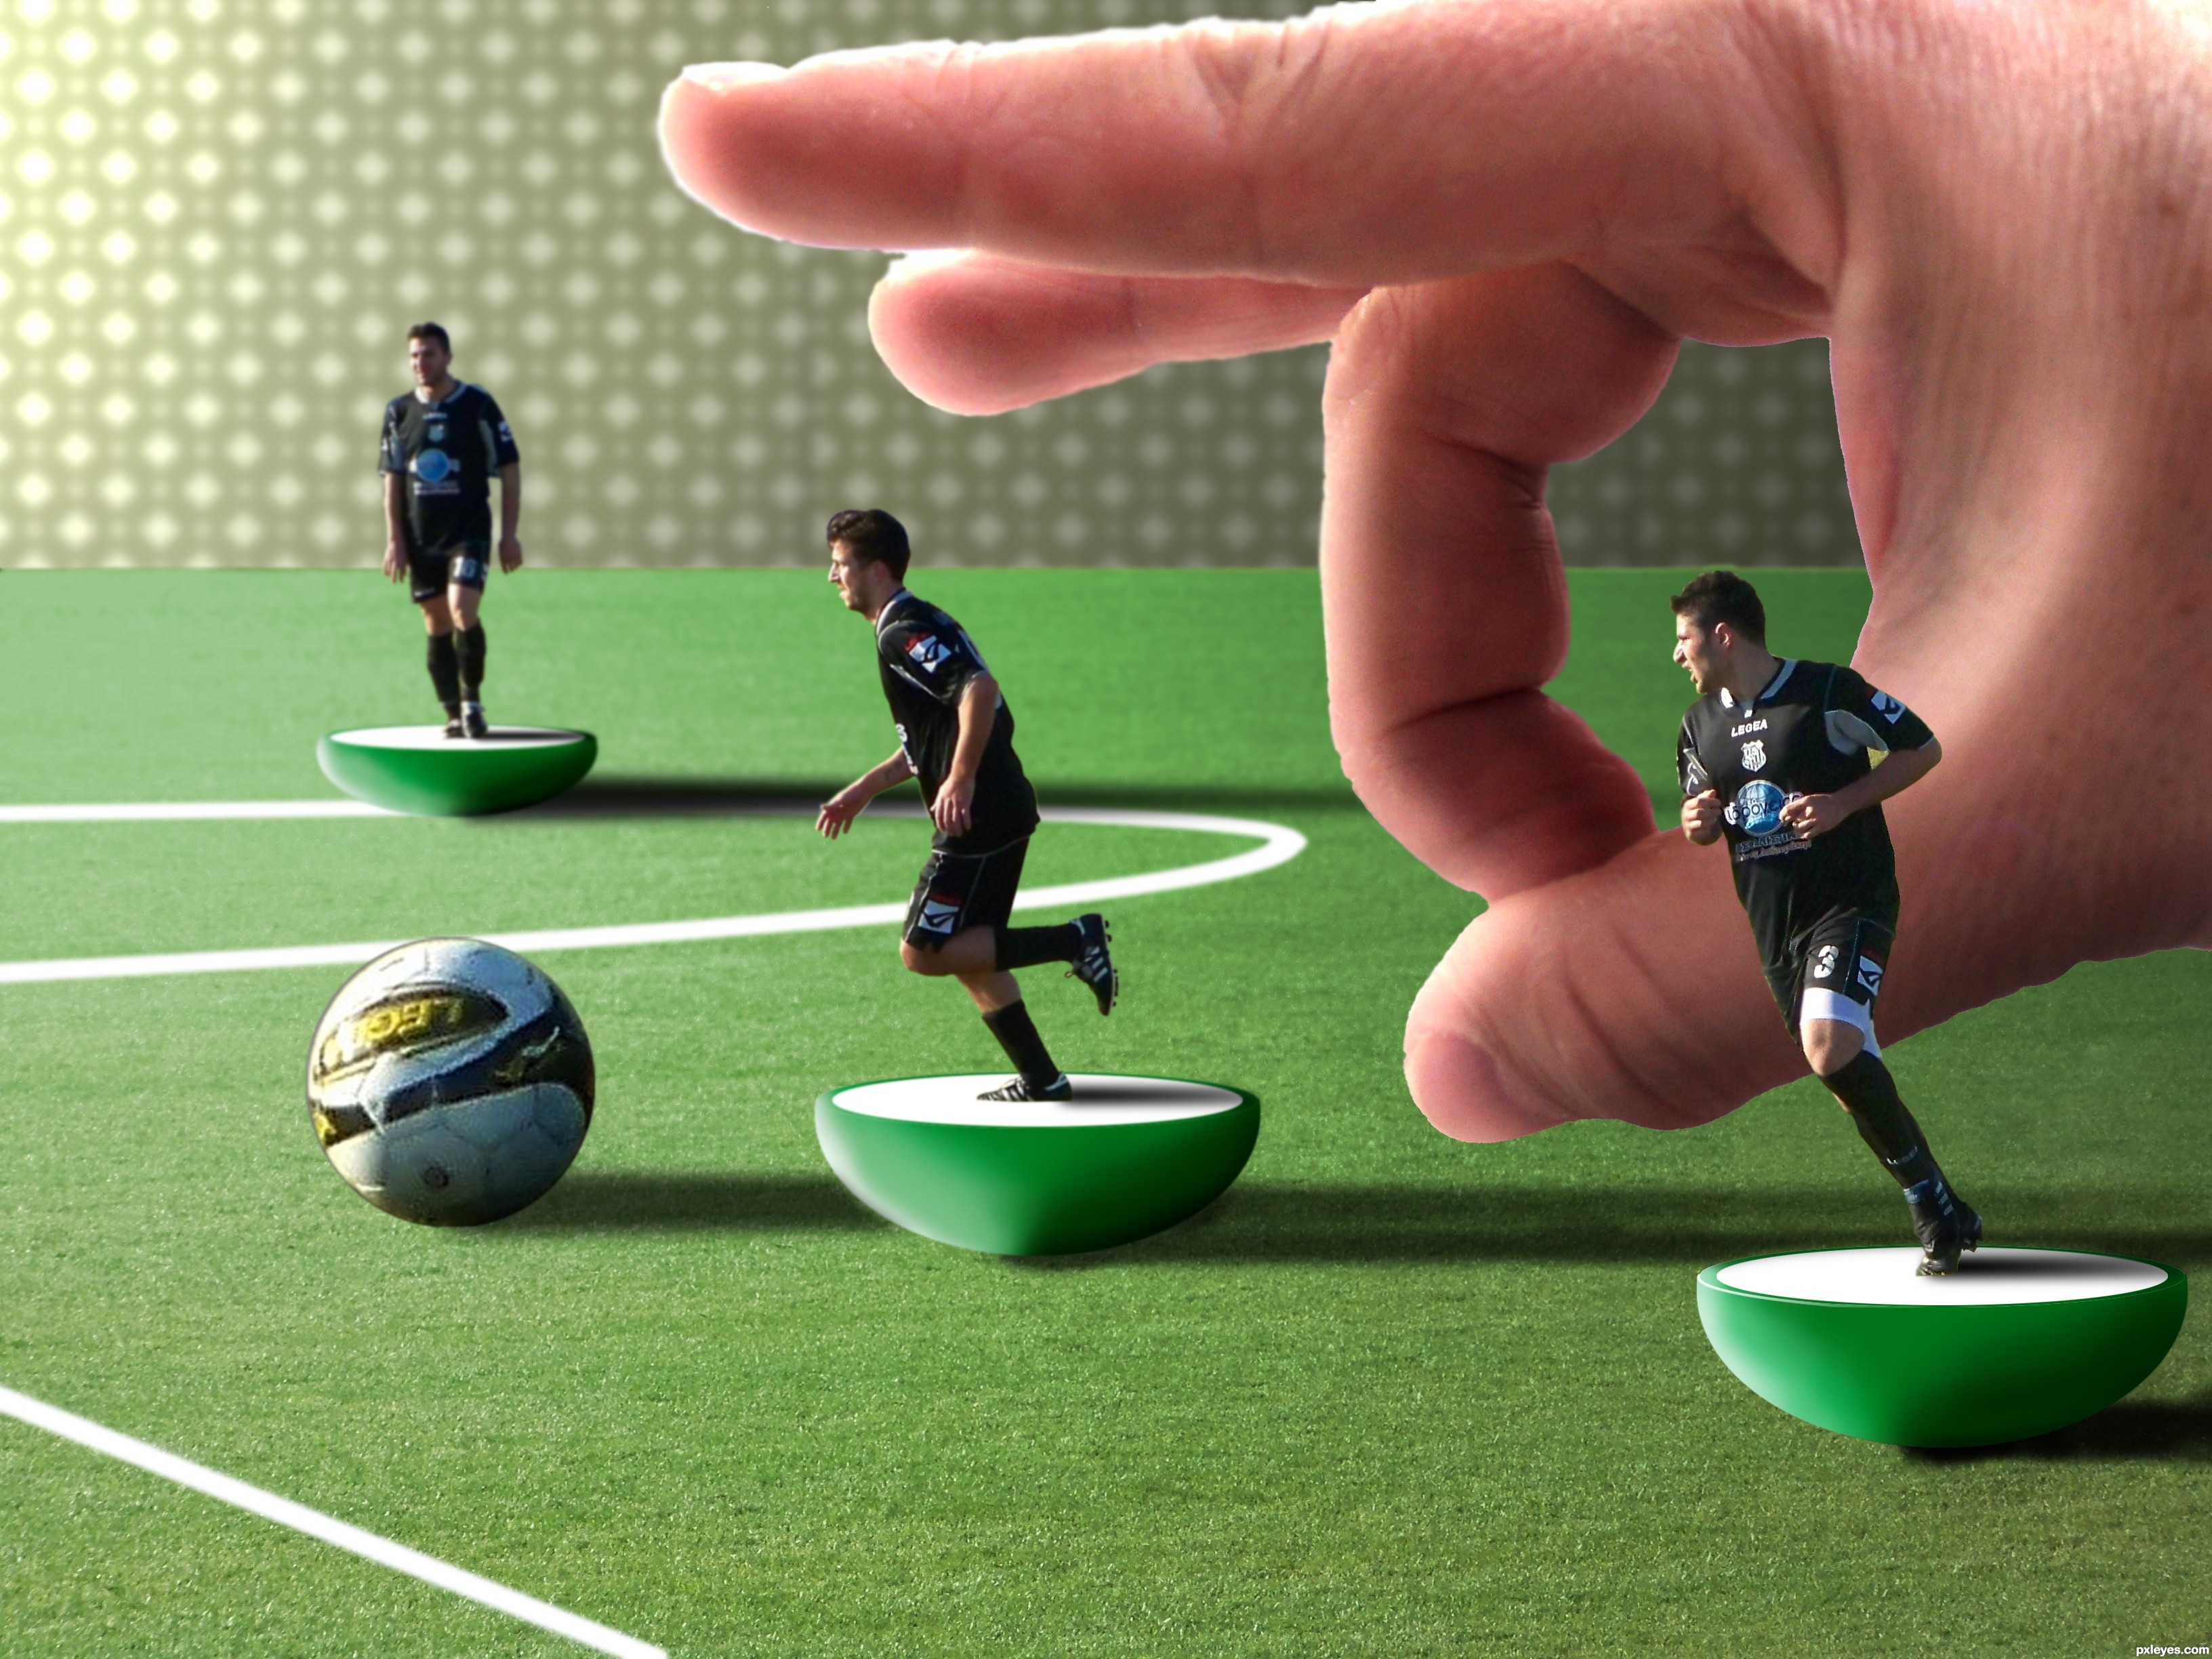 Subbuteo picture, by r1k3r for: full attack photoshop contest 